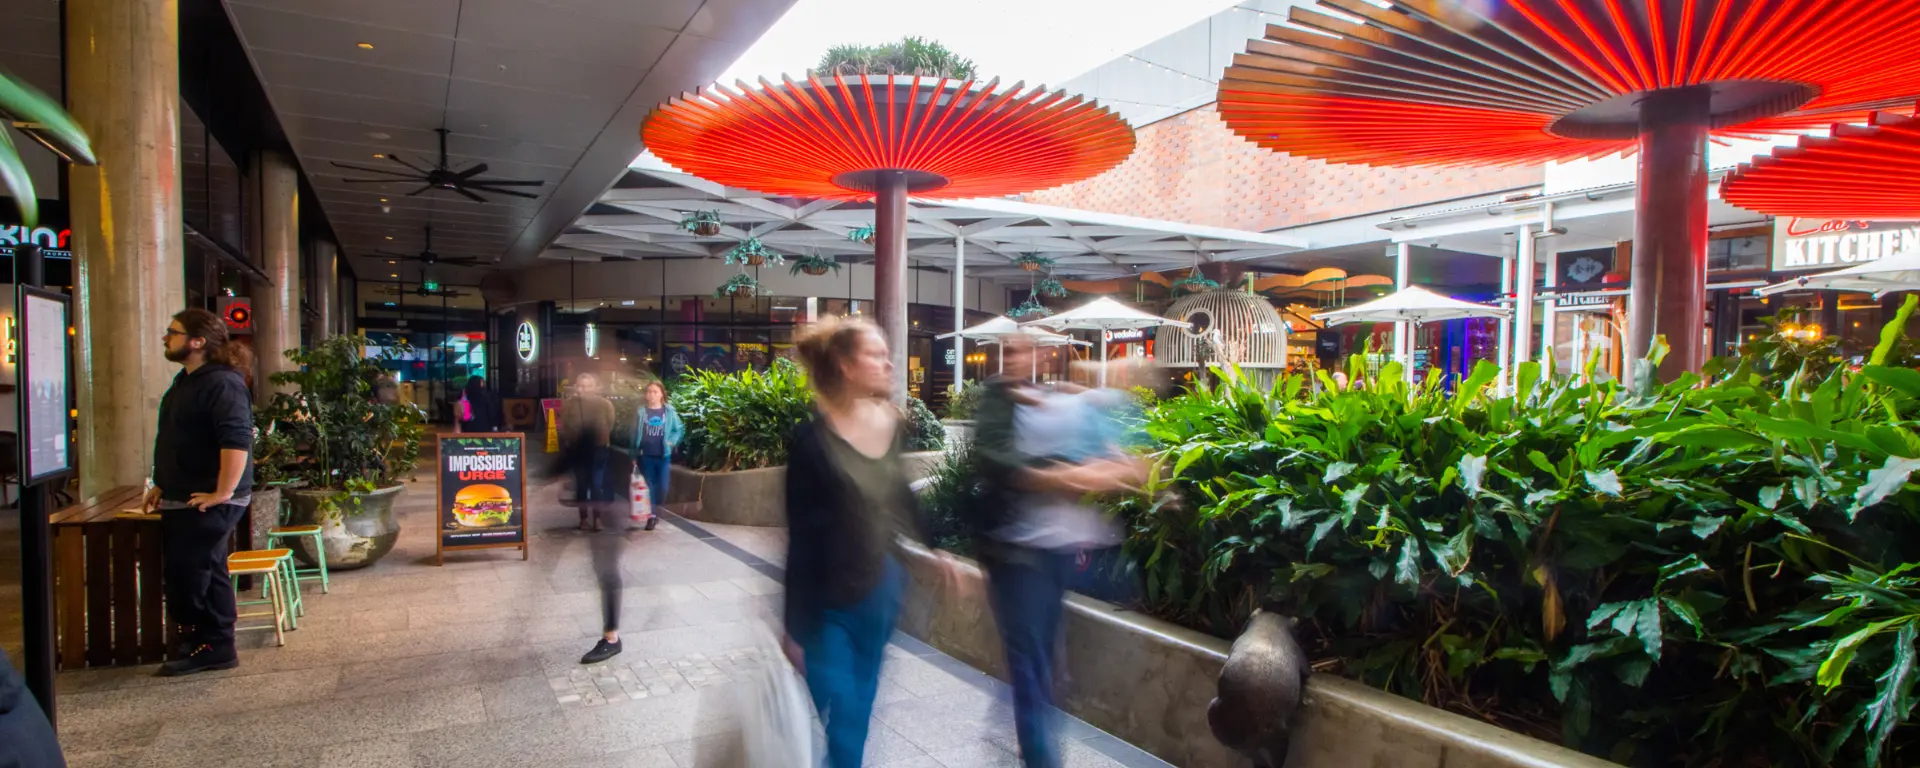 Stockland Green Hills outdoor dining precinct, the courtyard